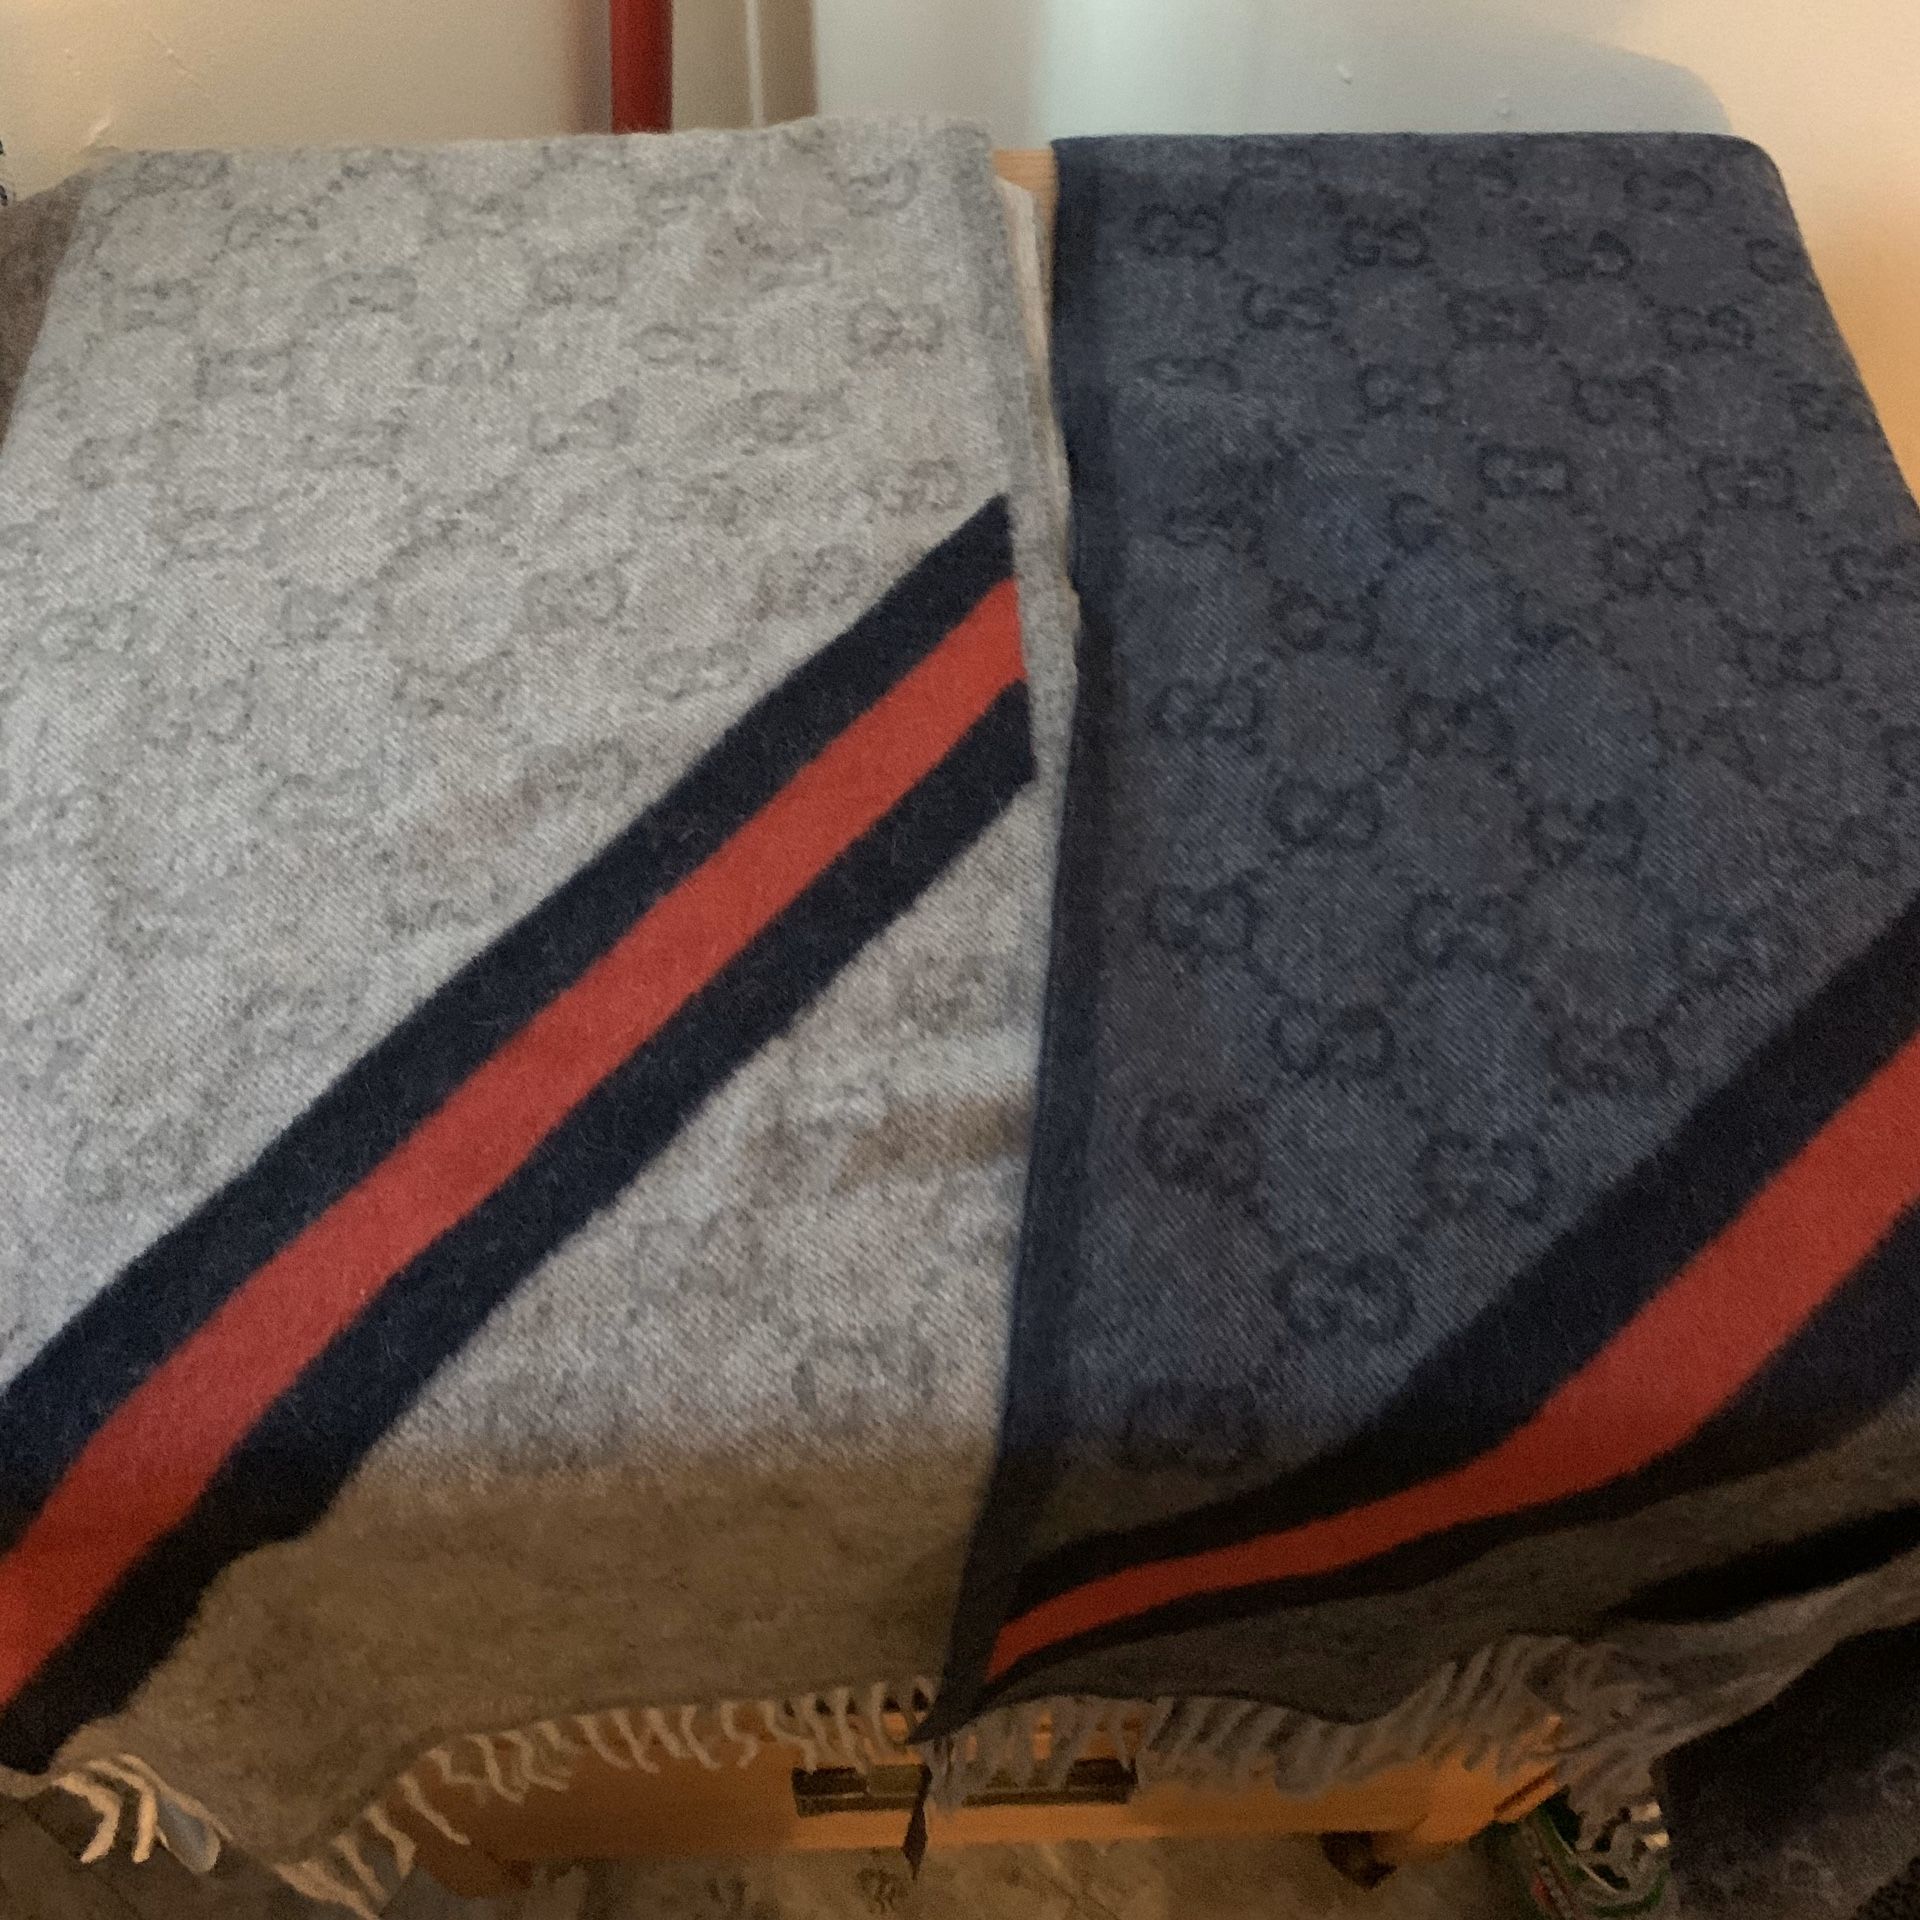 Gucci scarfs for men. Brand new tags still on